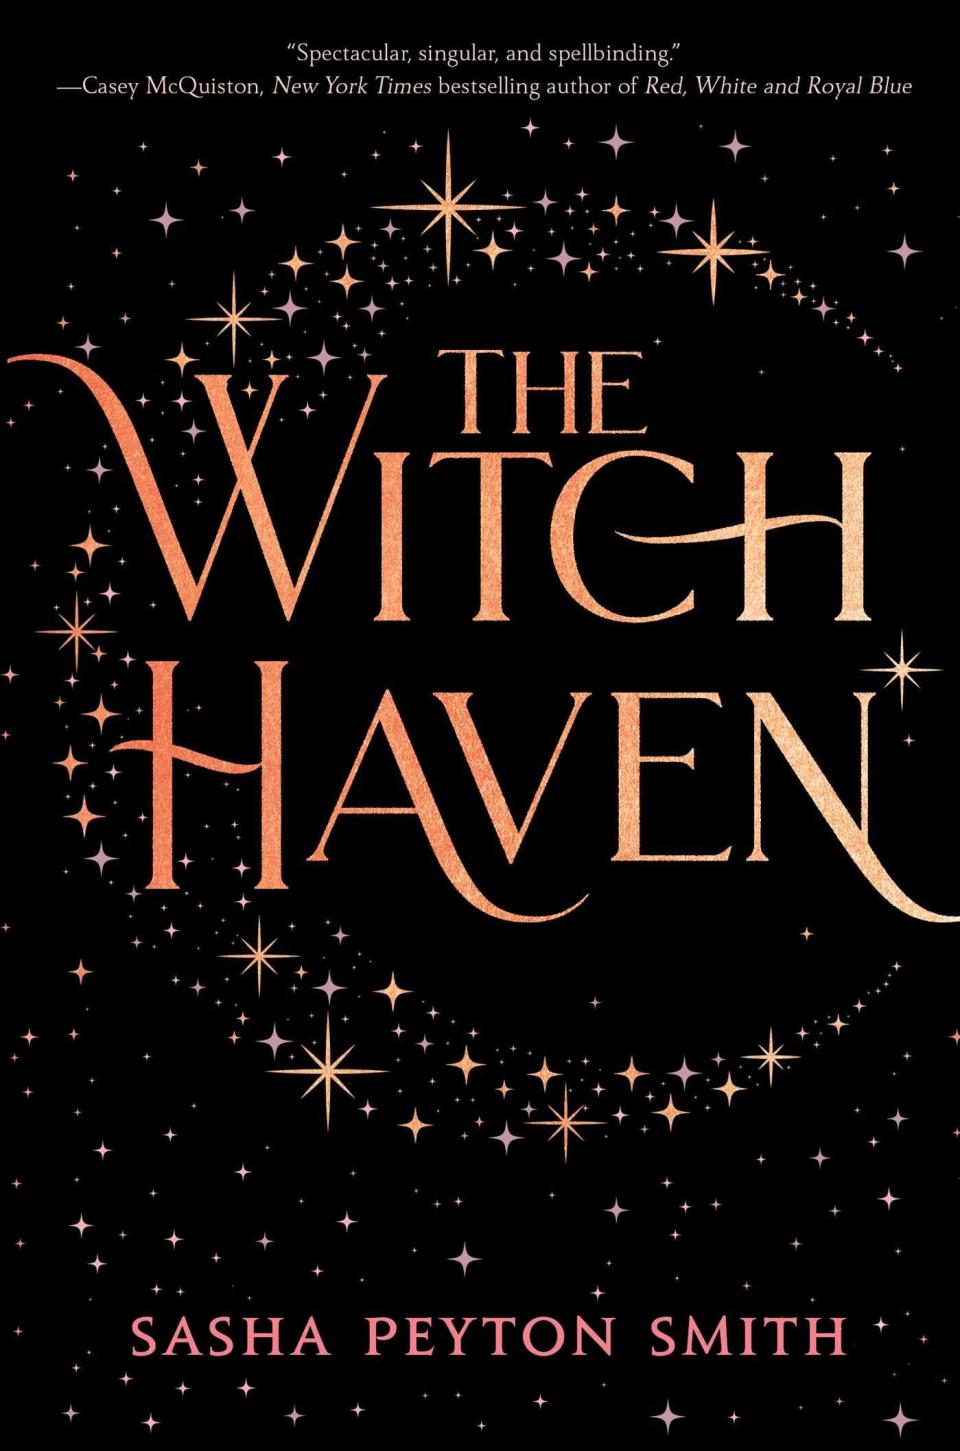 The cover for the witch haven shows the title The Witch Haven surrounded by starts